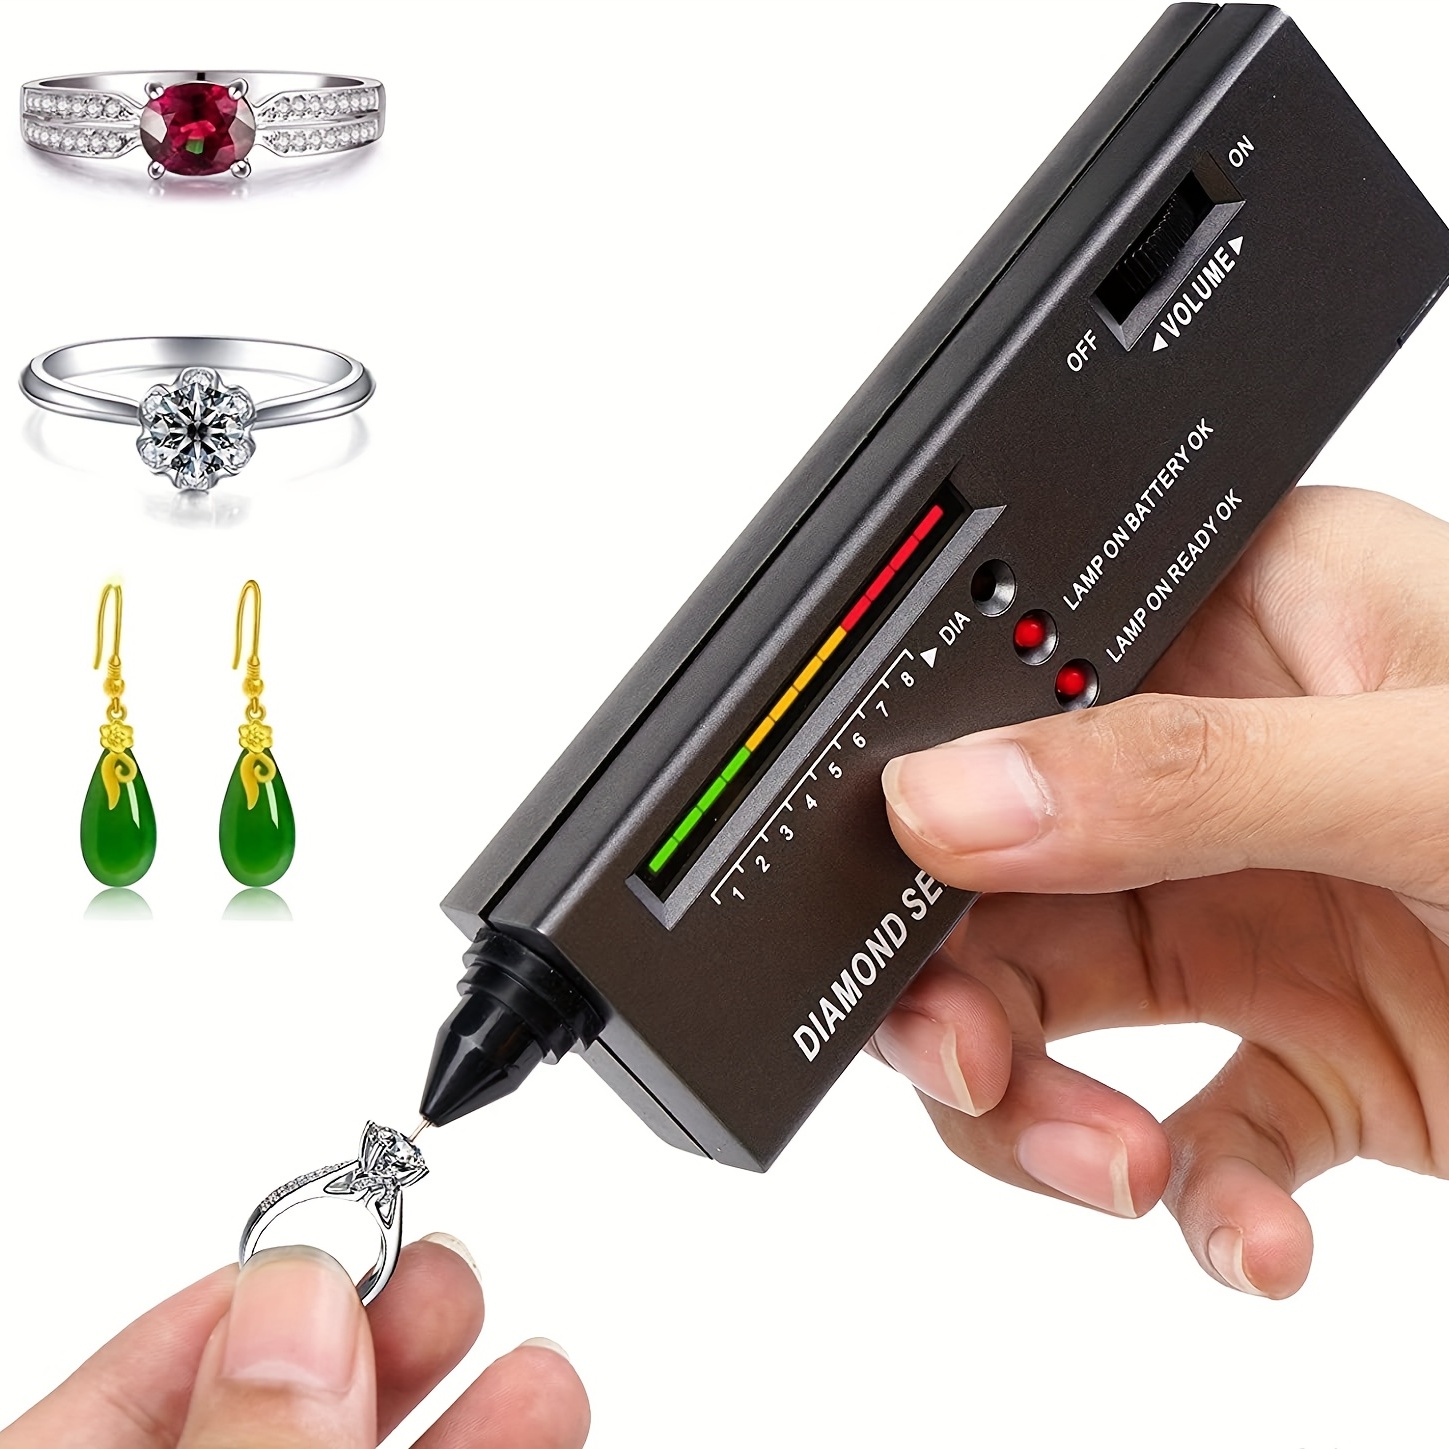 Diamond Tester,High Accuracy Dimond Test Pen,Jewelry Gem Tester  Pen,Portable Electronic Diamond Checker Tool,Professional Diamond Selector  for Novice and Expert(Battery Included) (Diamond Tester)